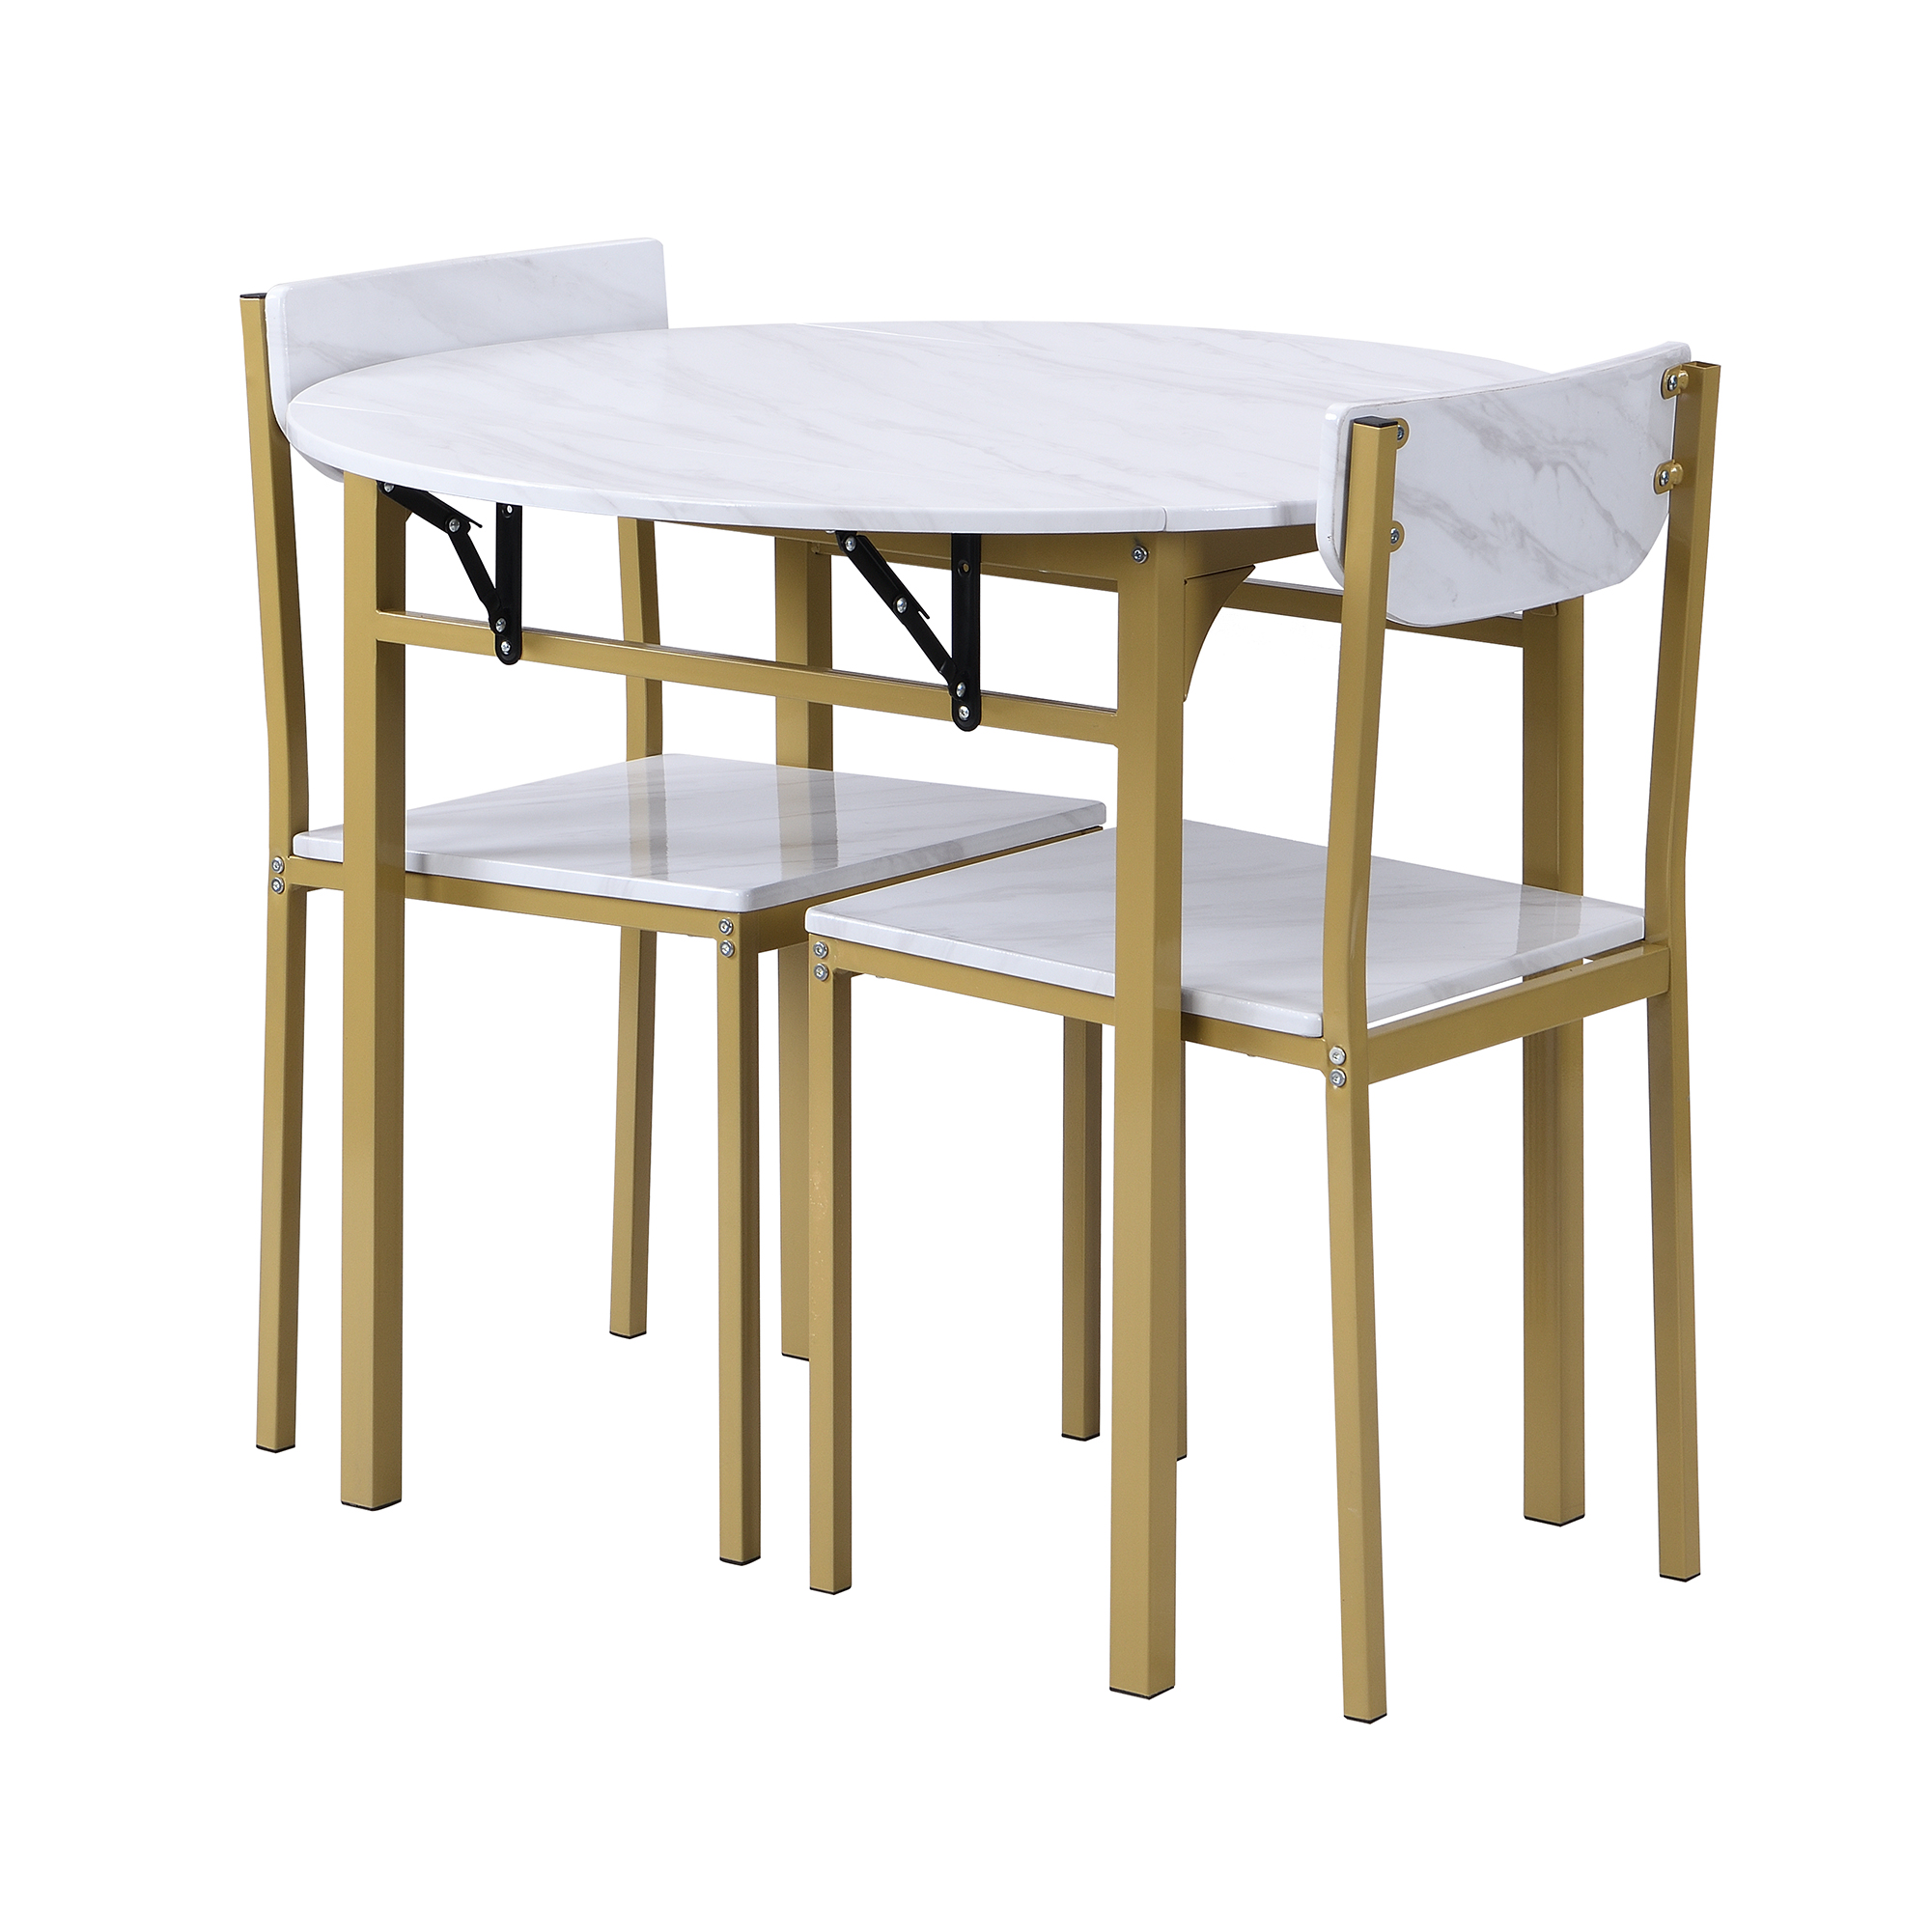 Modern 3-Piece Round Dining Table Set with Drop Leaf and 2 Chairs for Small Places,Golden Frame+Faux White Granite Finish